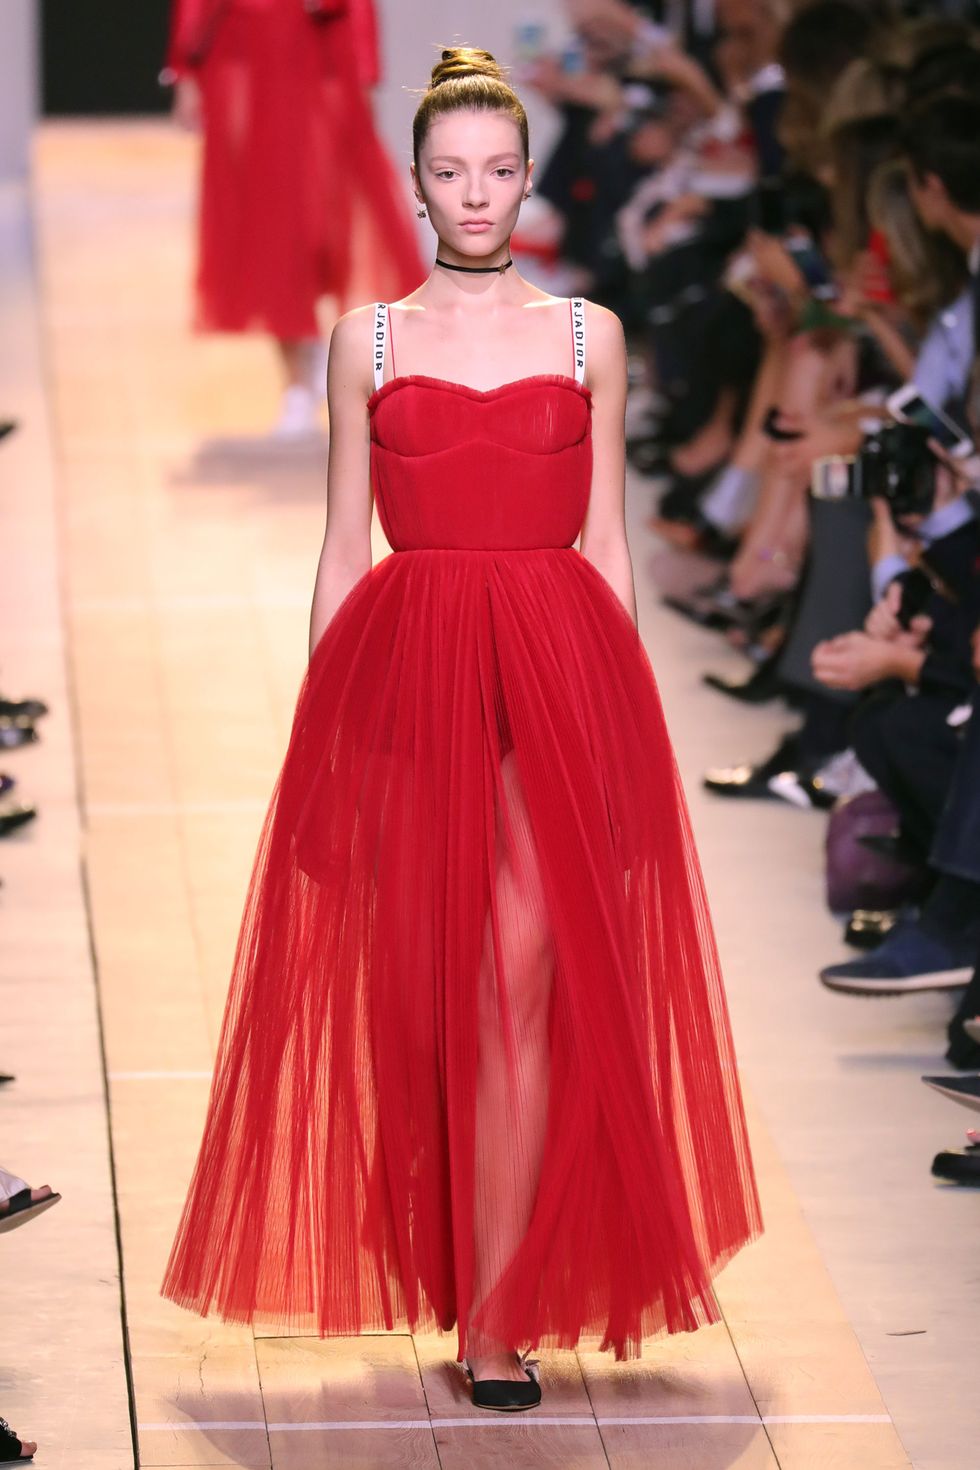 Clothing, Fashion show, Shoulder, Dress, Red, Runway, Fashion model, Style, Waist, Gown, 